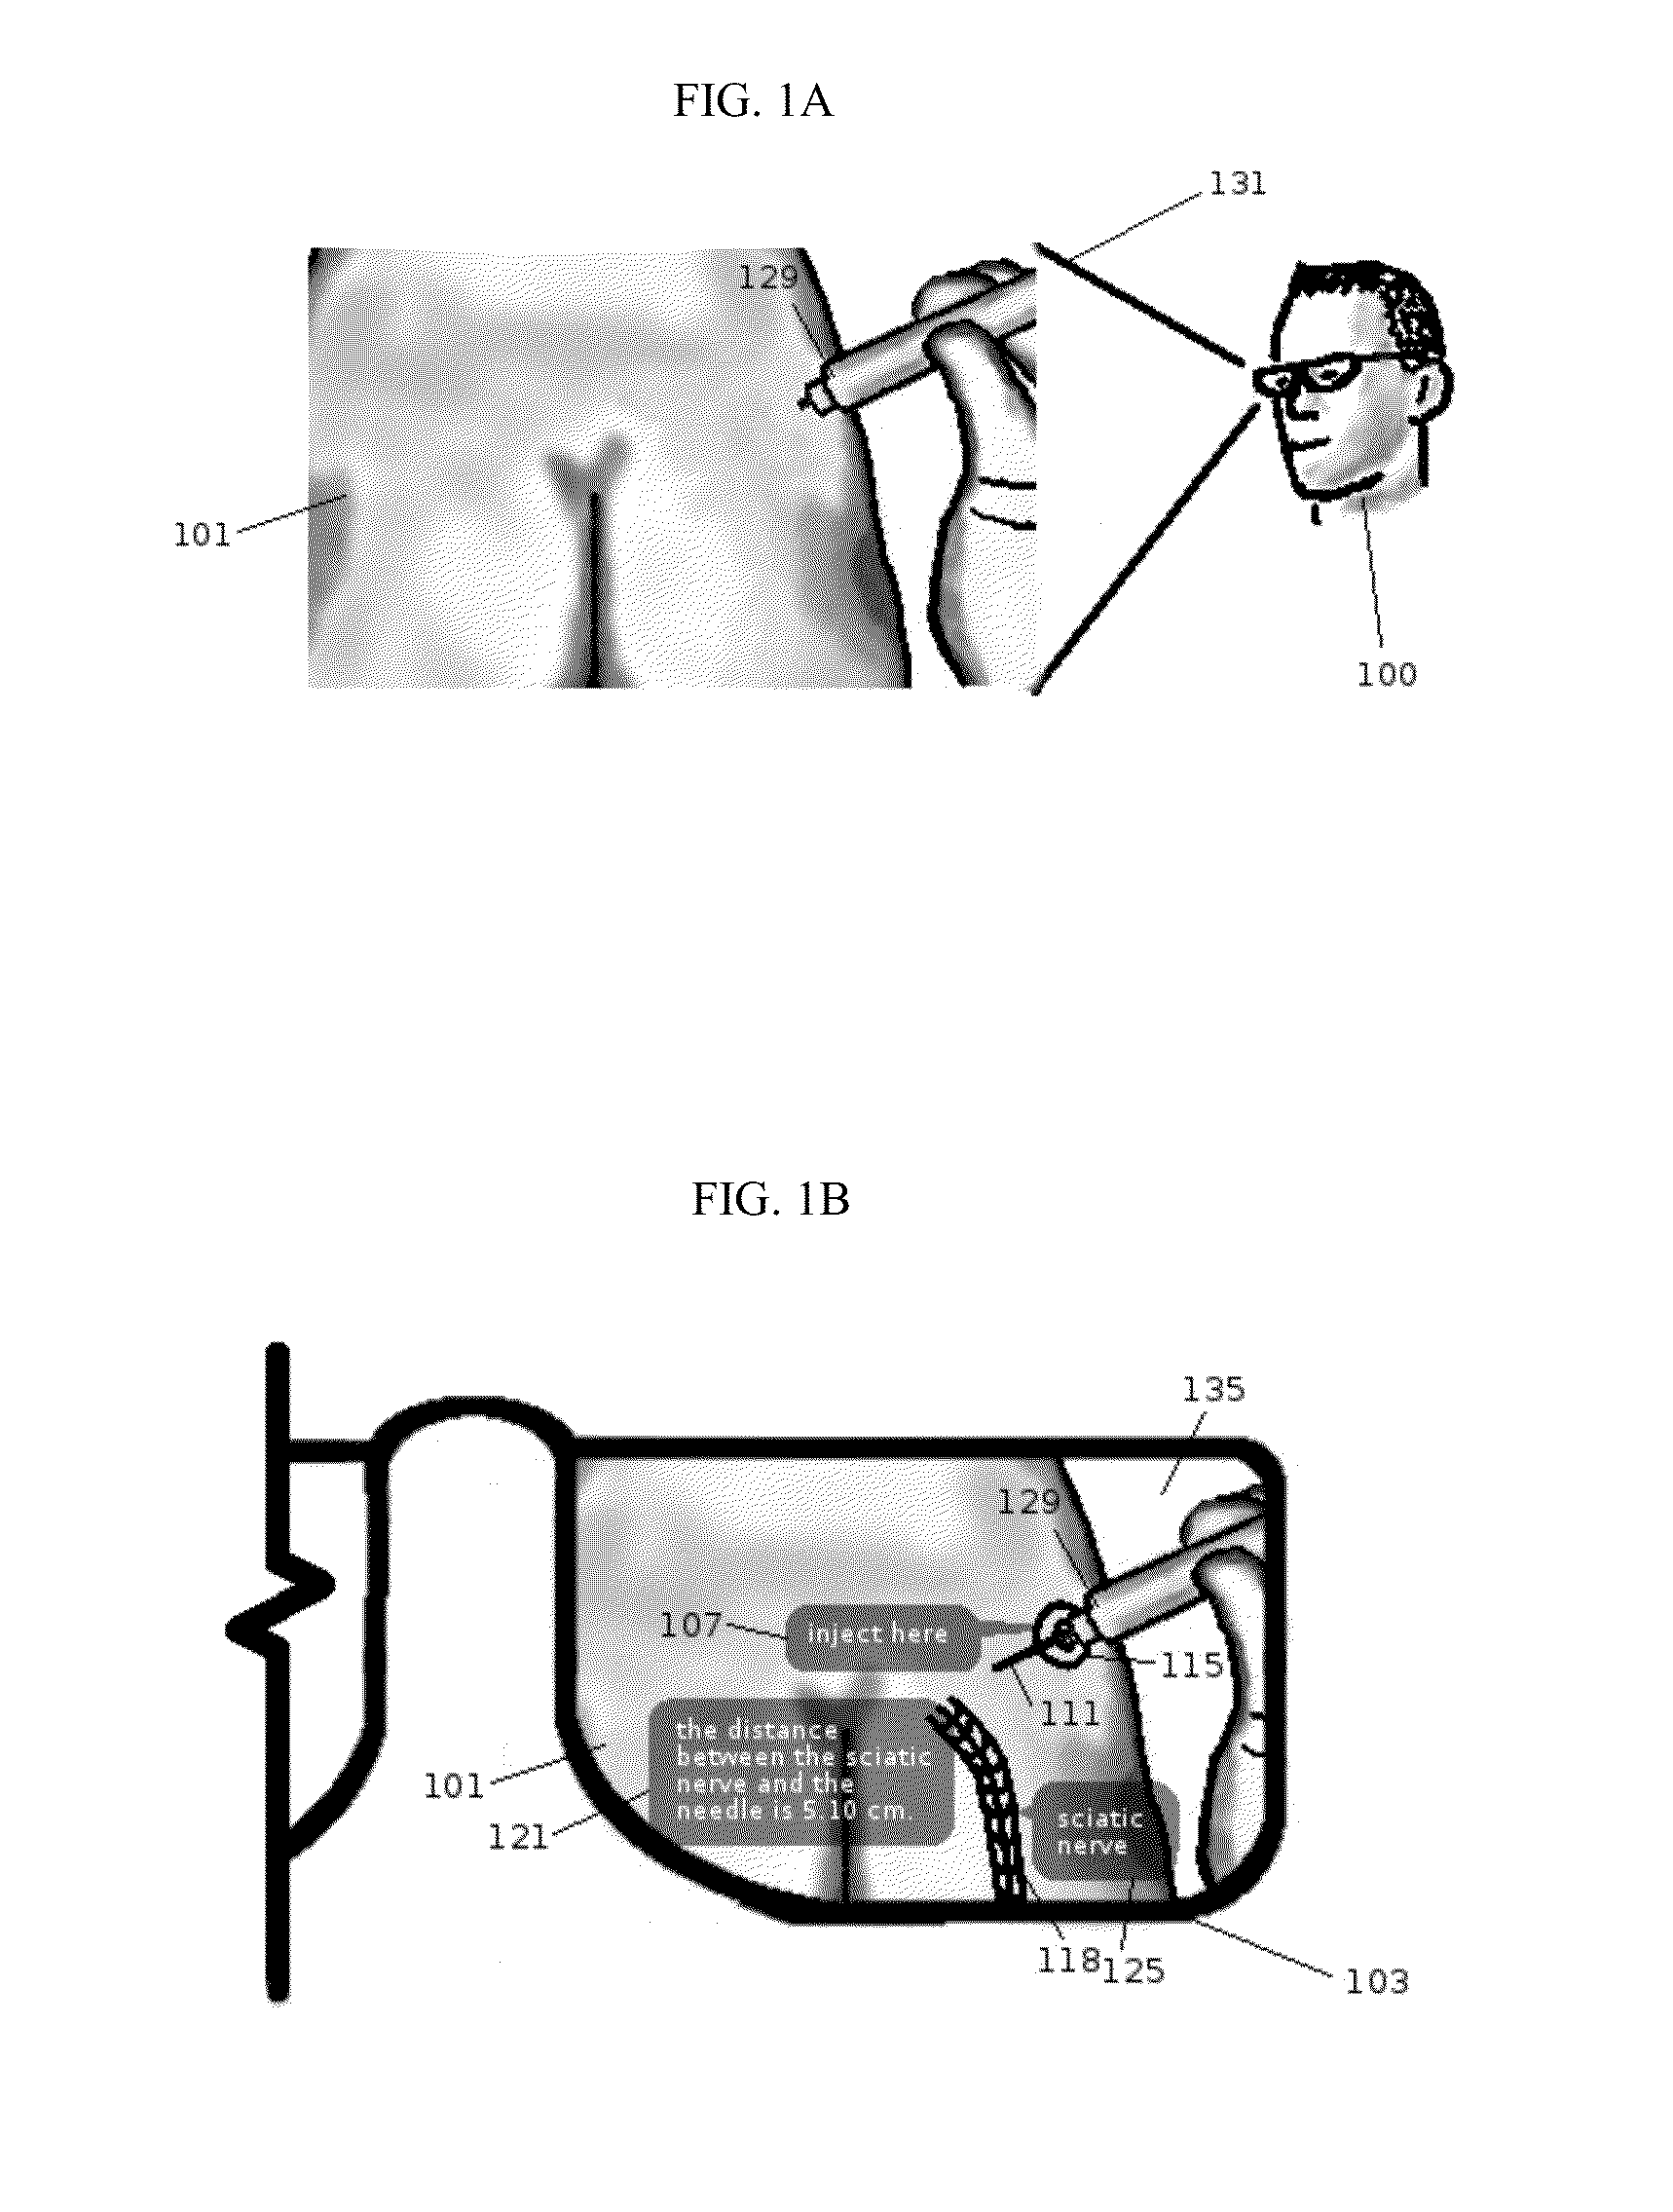 Method and system of displaying information during a medical procedure